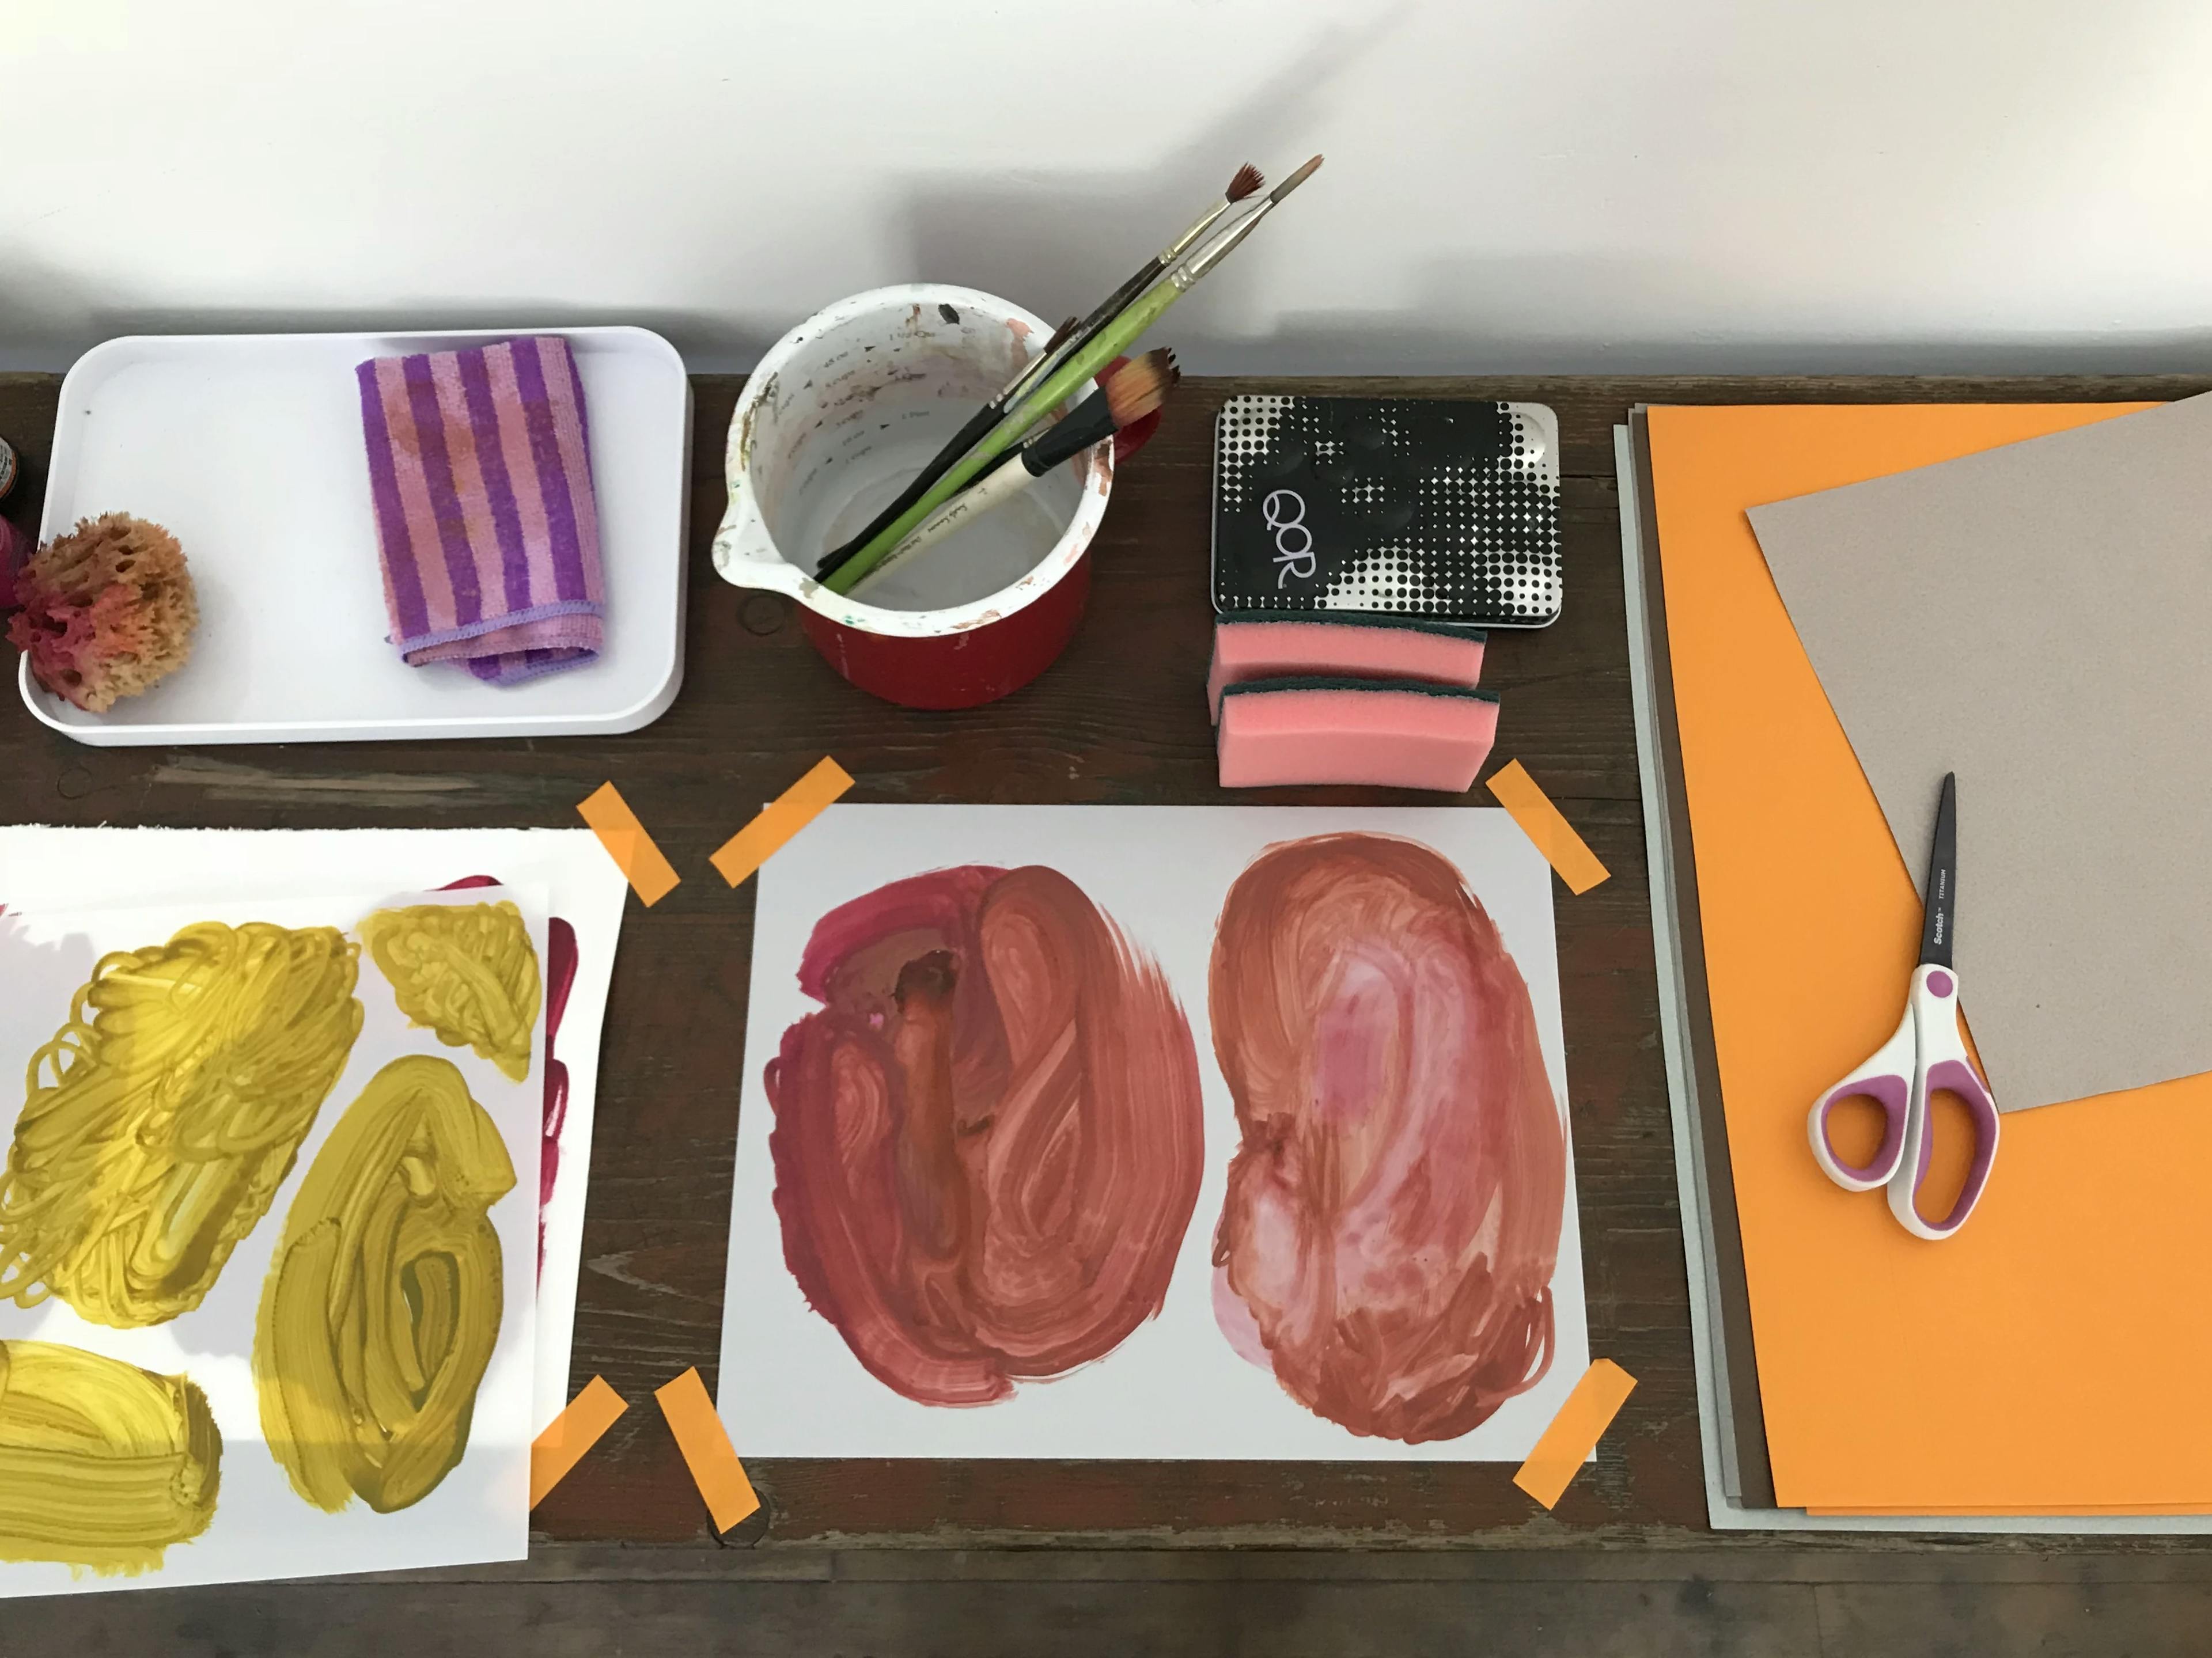 Two in-progress works by artist Xochi Solis with swaths of colors, one yellow and one red, taped to a wooden surface in her studio.